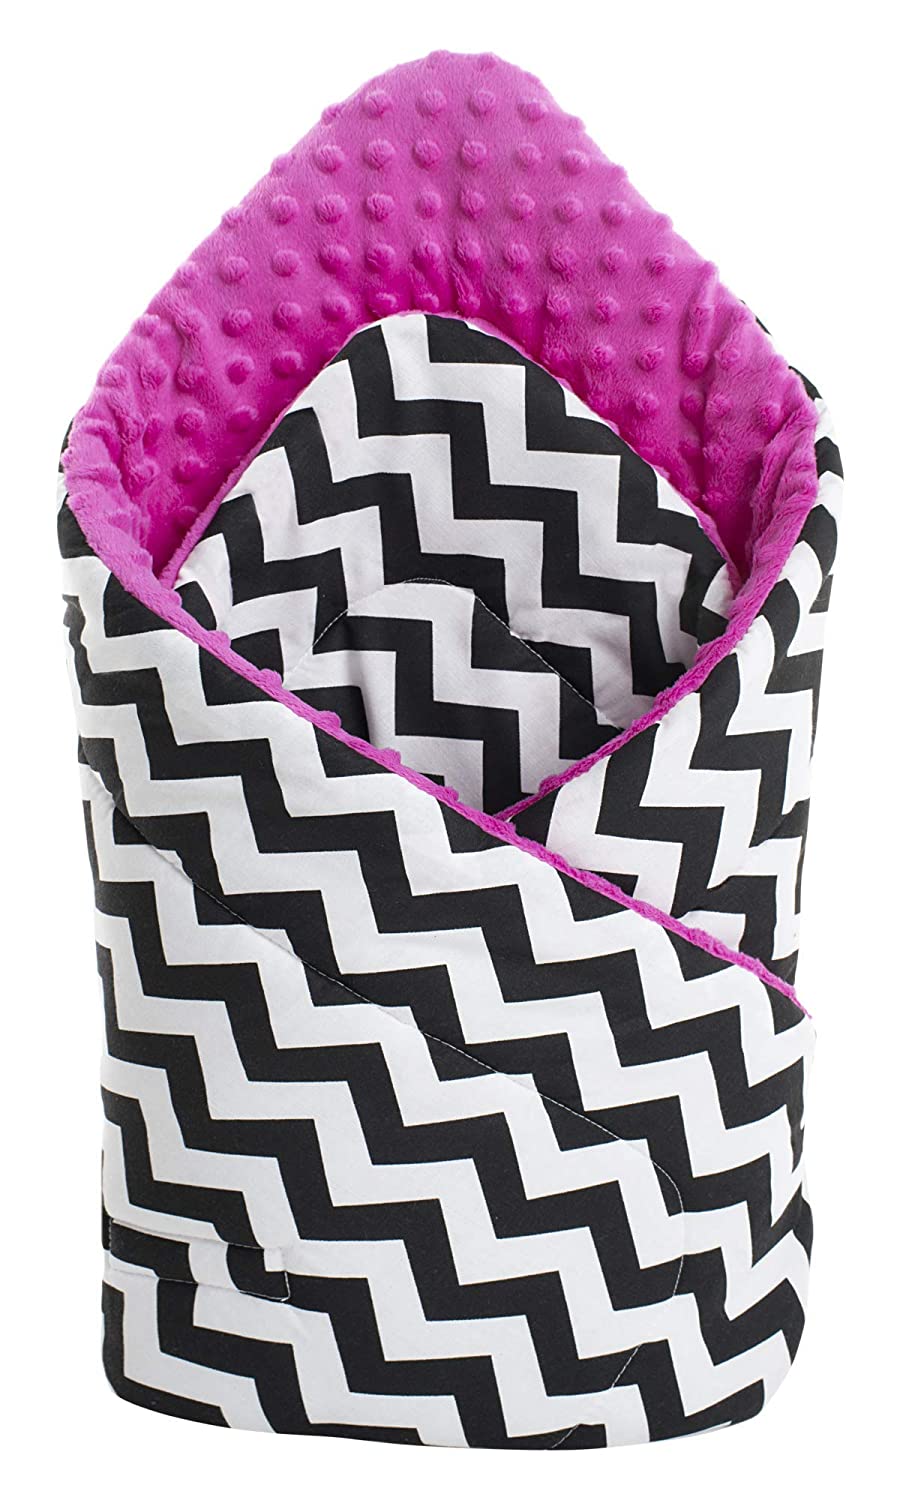 Minky Swaddling Blanket 100% Cotton 75 x 75 cm Baby Pillow Double Sided Soft All Year Round Multifunctional Anti-Allergic Babies Medi Partners (Zigzag with Pink Minky)